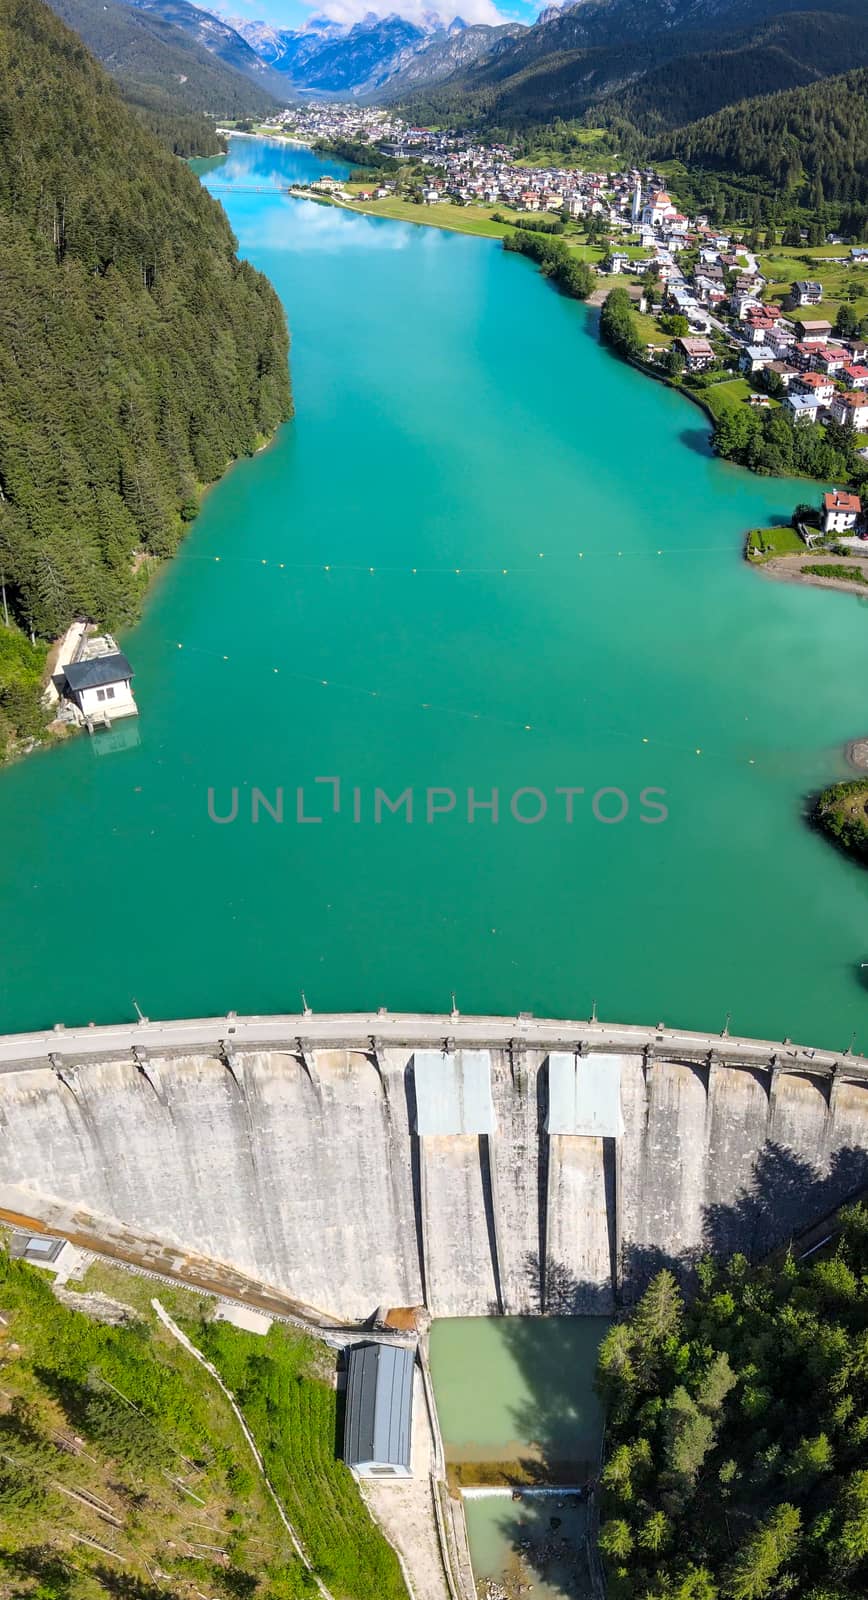 Alpin lake and dam in summertime, view from drone, Auronzo, ital by jovannig